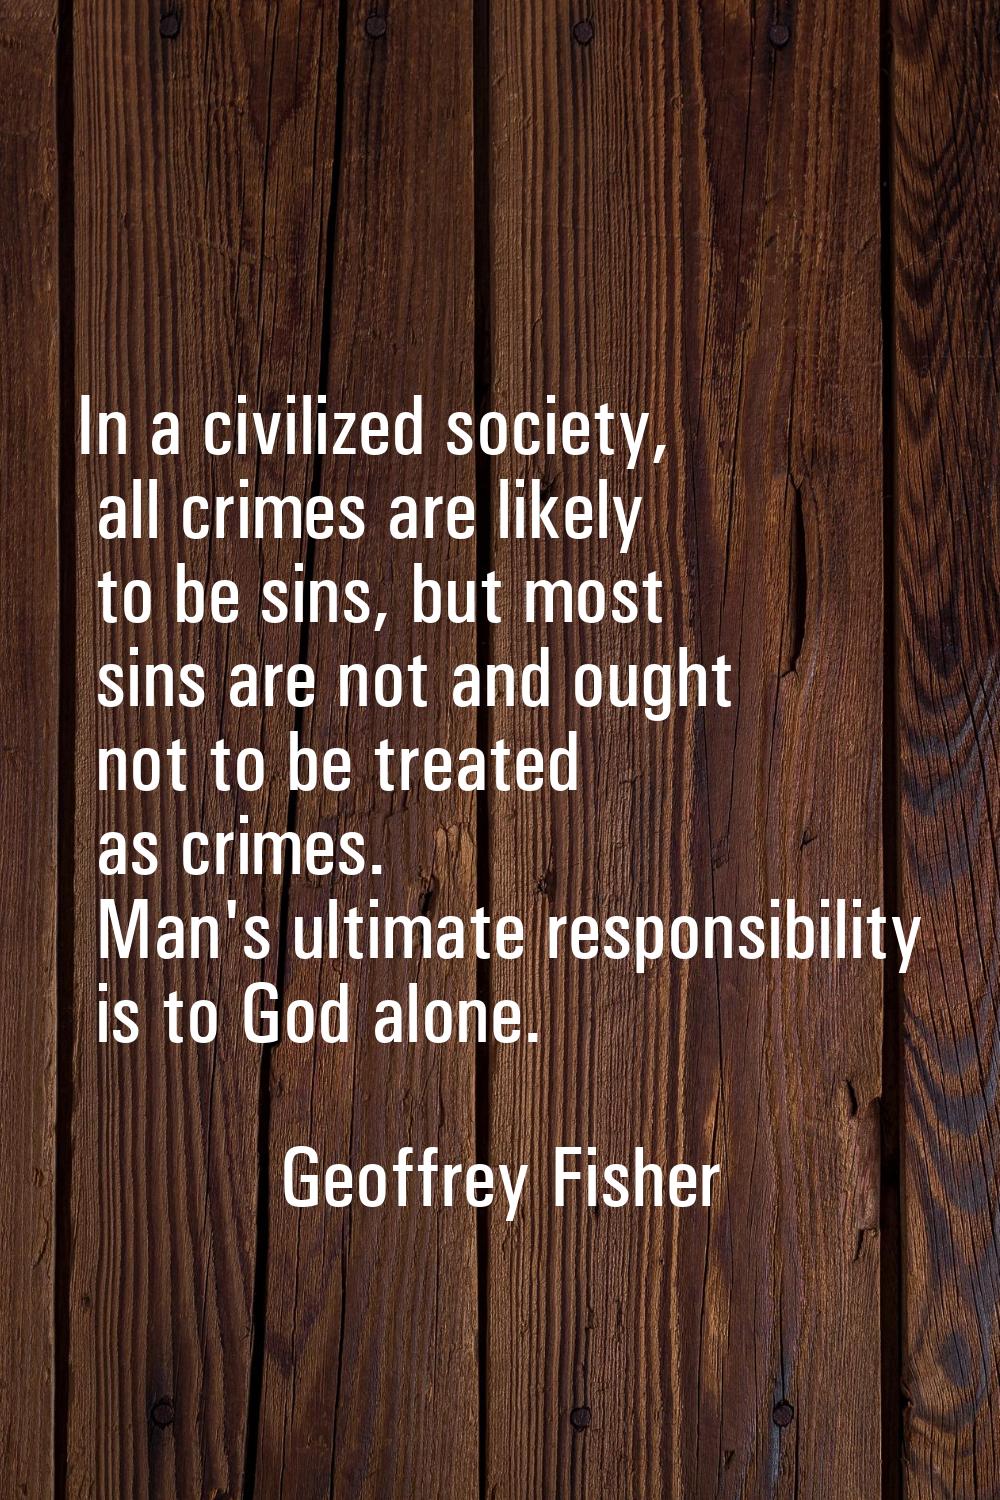 In a civilized society, all crimes are likely to be sins, but most sins are not and ought not to be